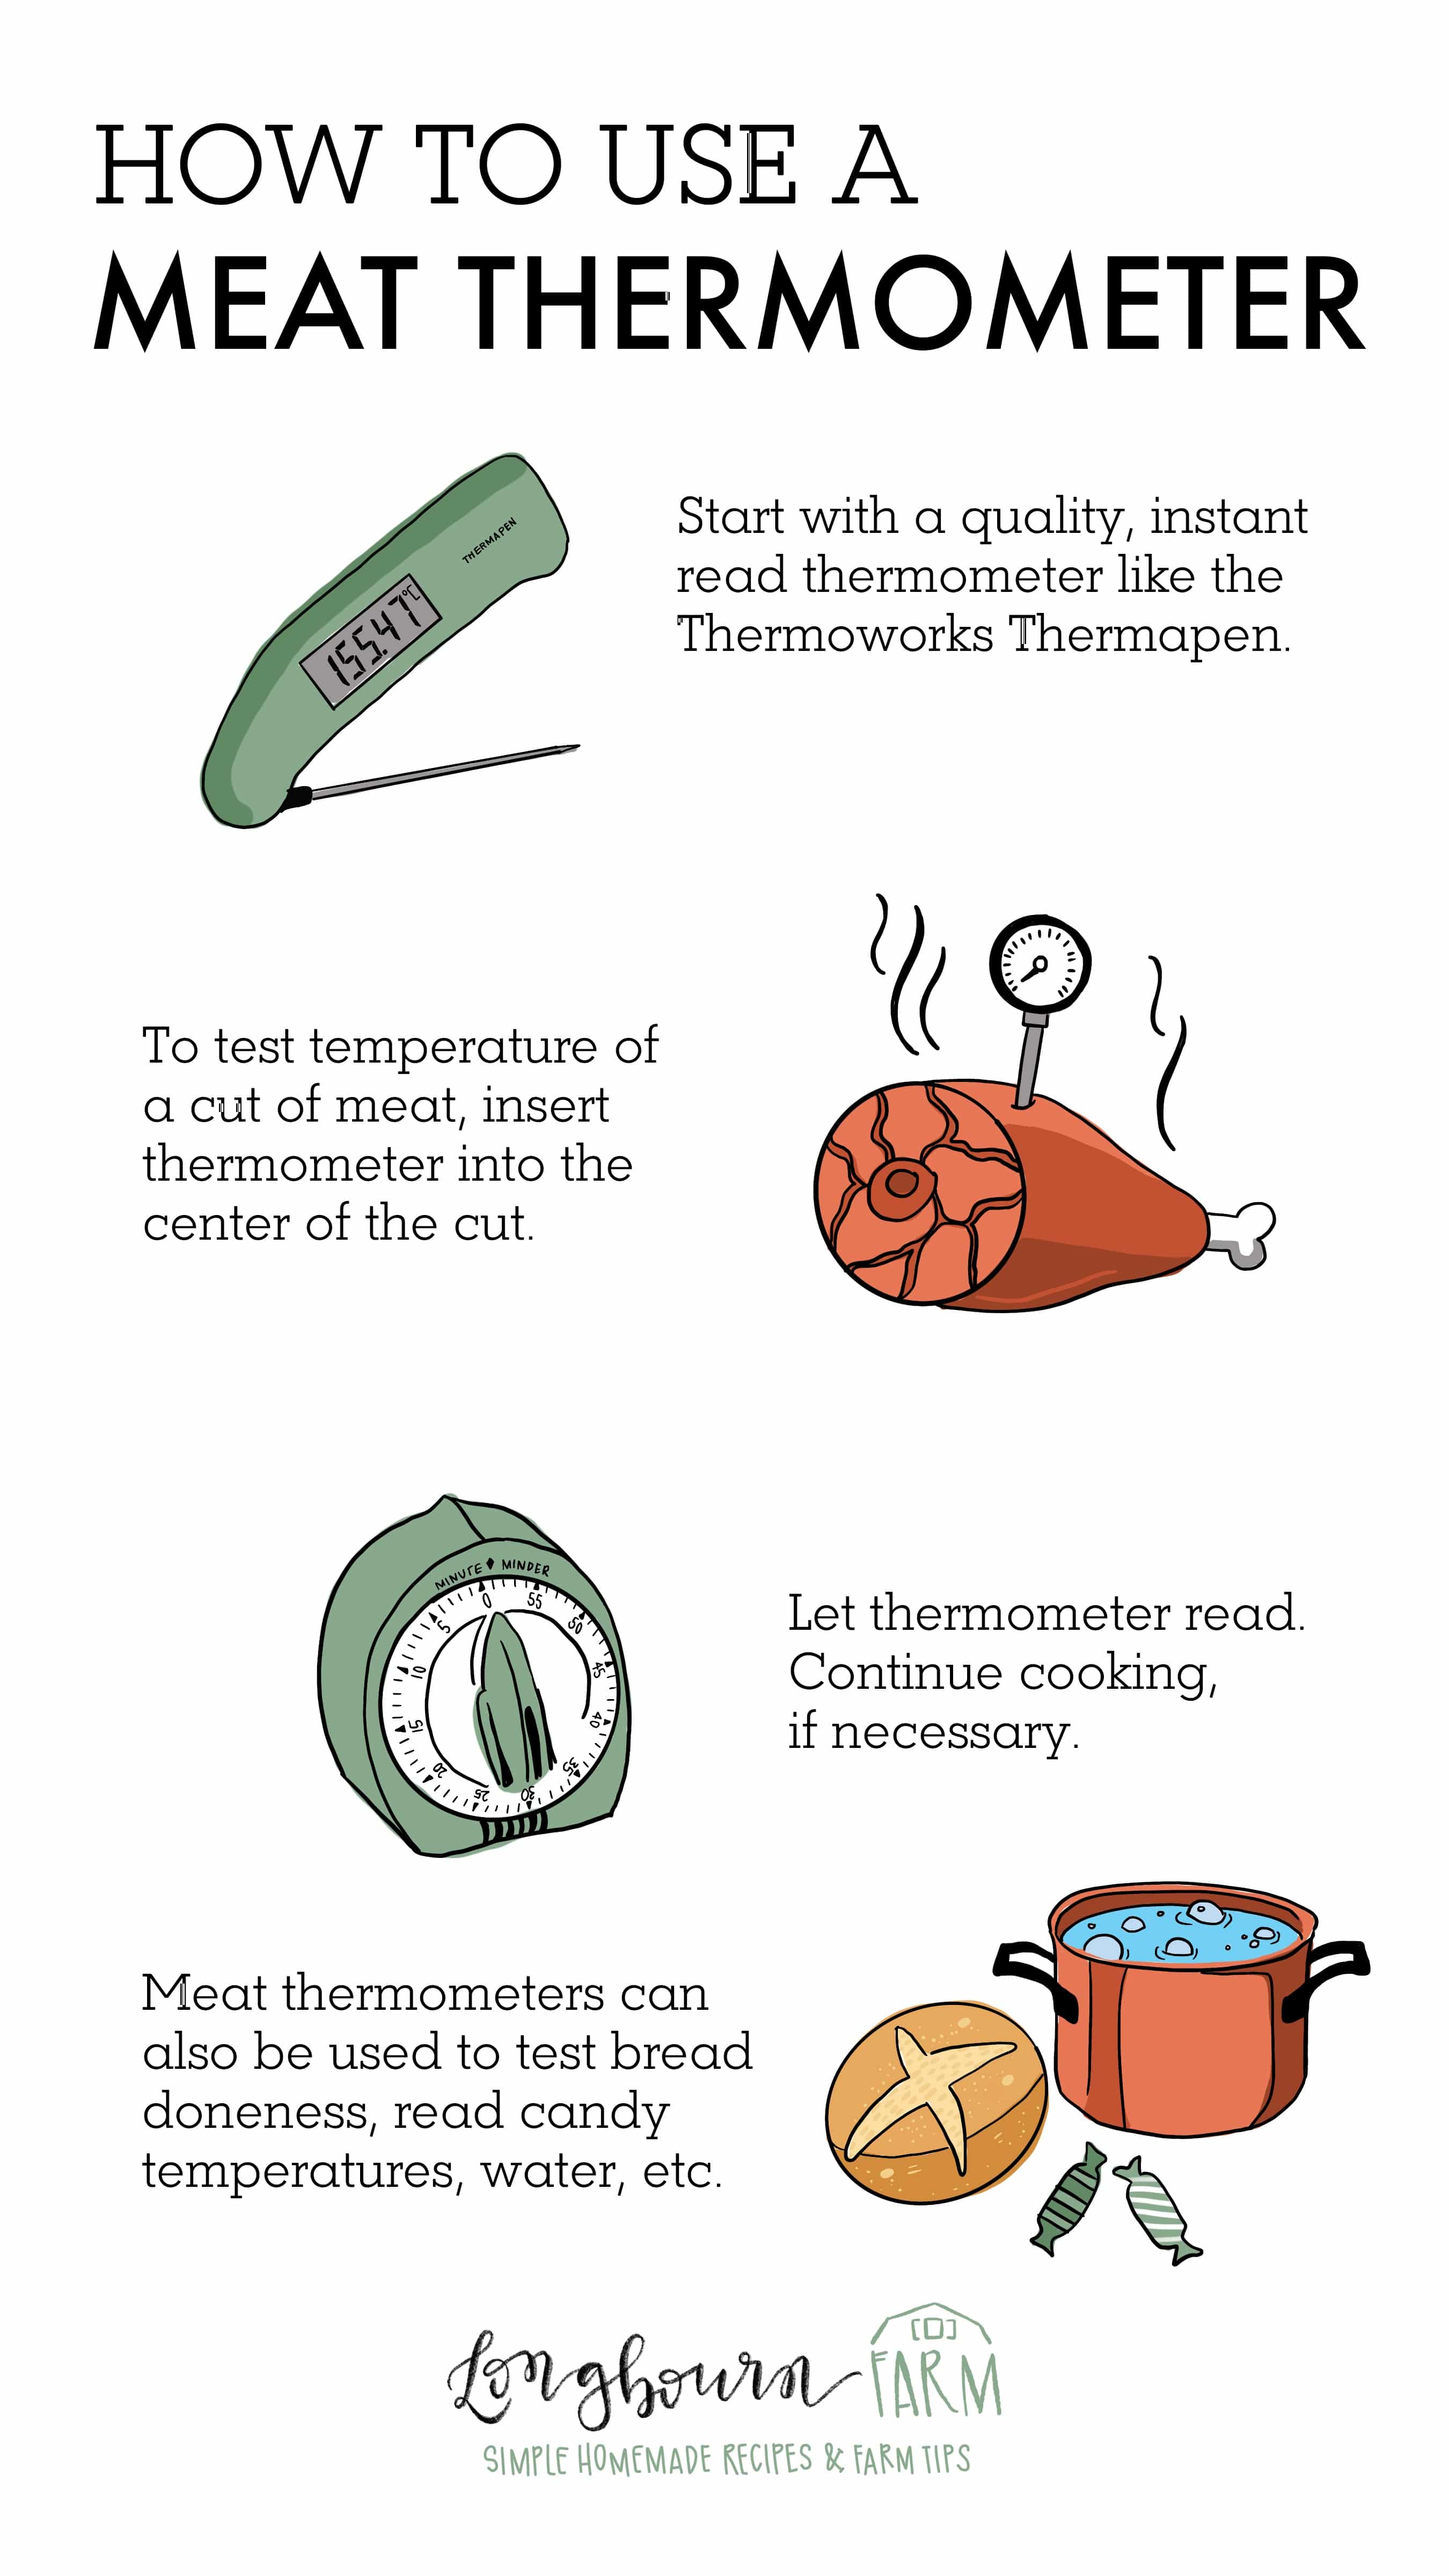 Learning how to use a meat thermometer is a vital skill for the kitchen! Having overdone meat isn't good at all, and underdone meat is very dangerous. #meatthermometer #thermometer #meatcooking #meatcookingtemps #meatcookingtemperatures #cookingtemperatures